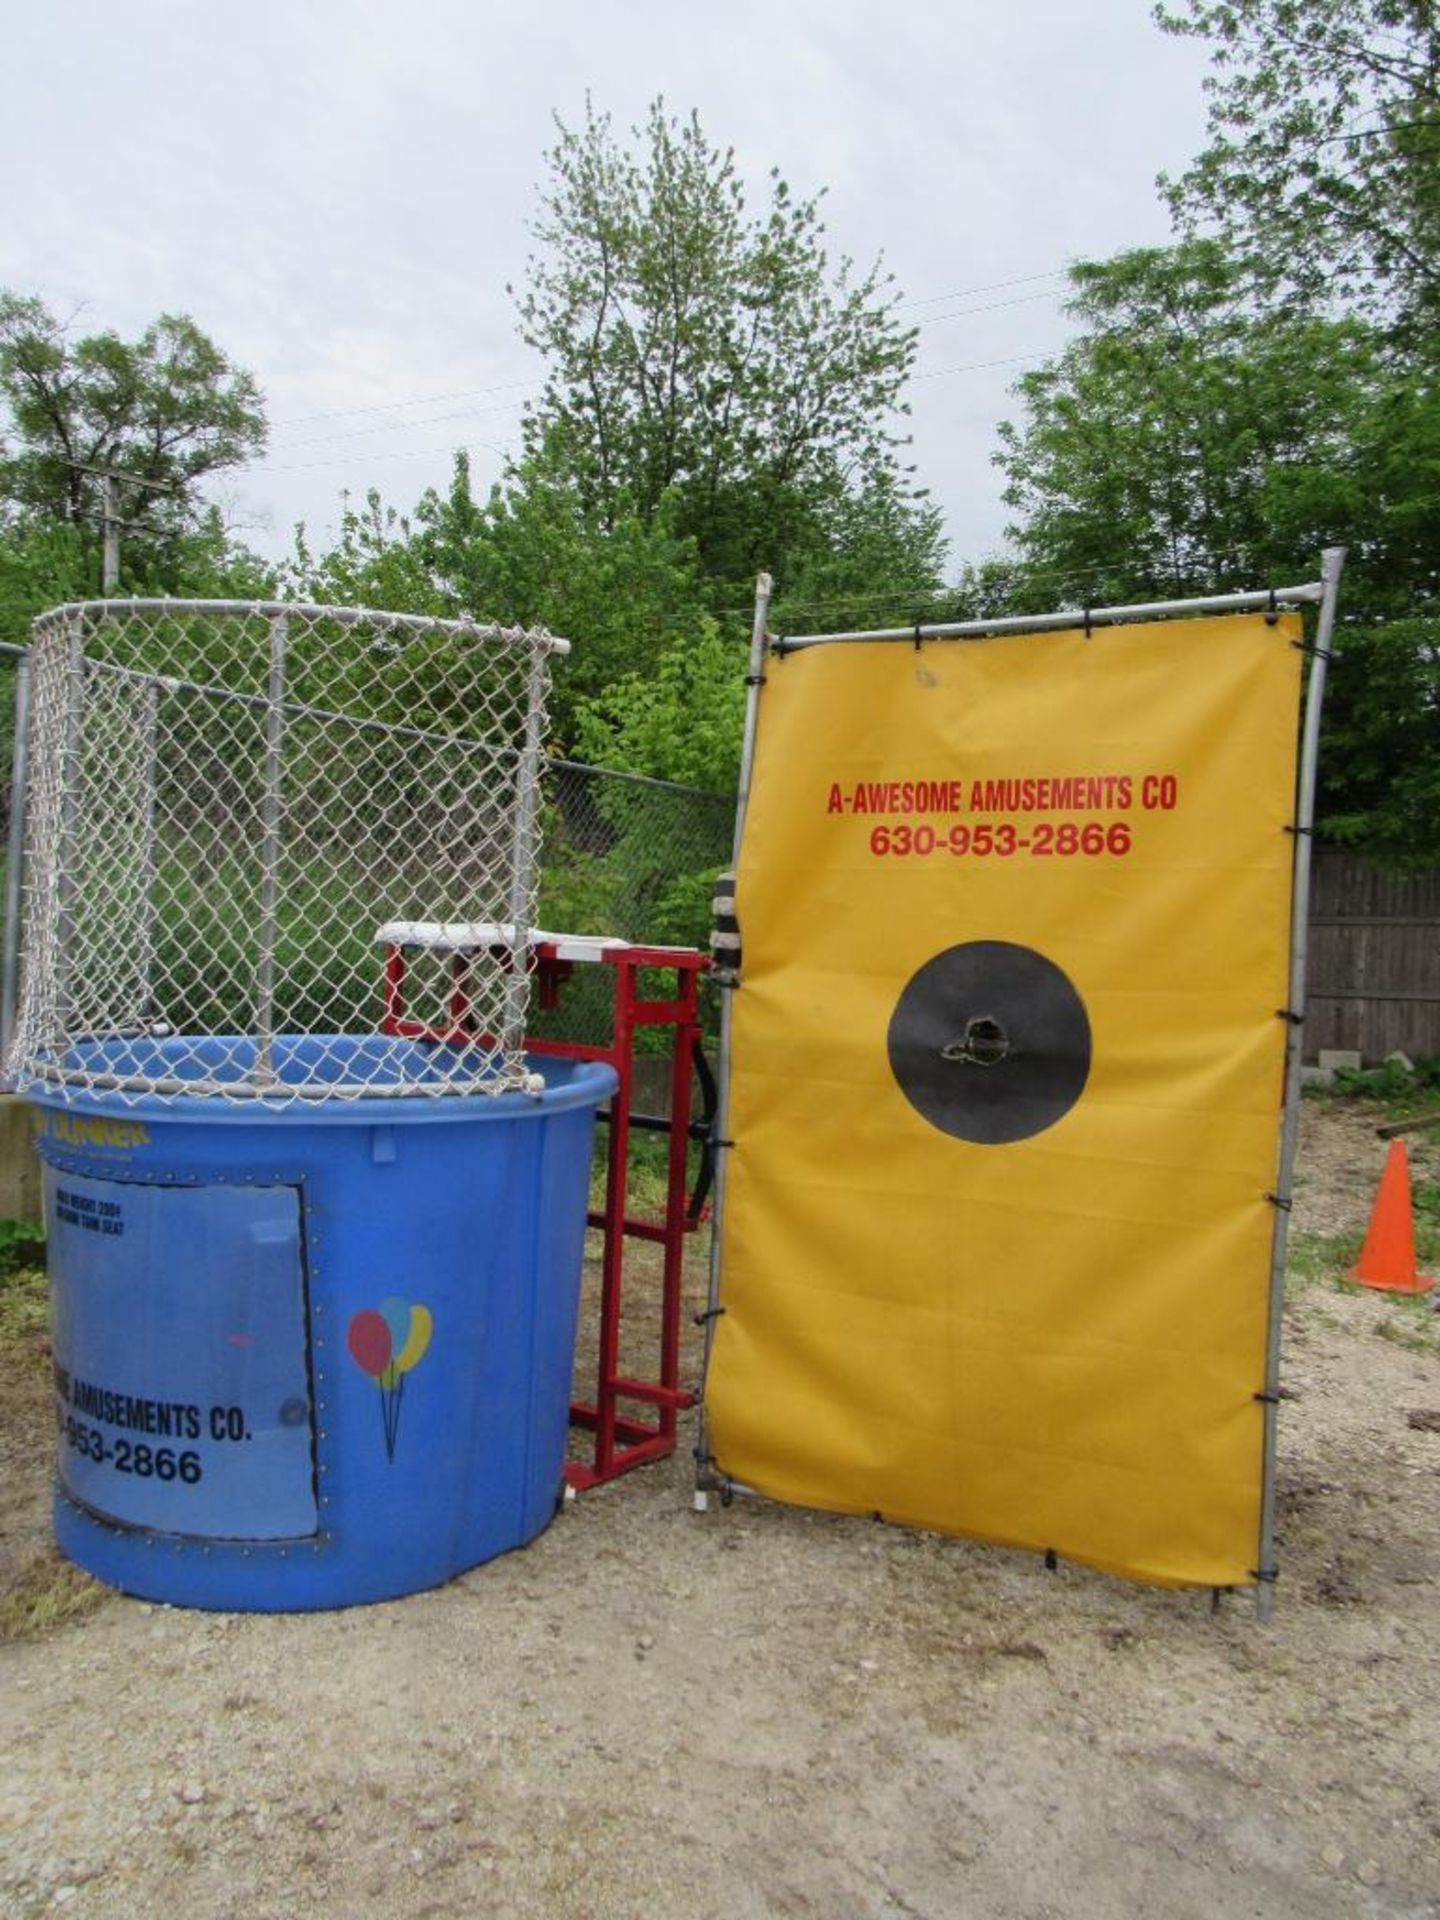 Dunk Tank Trailer mounted - includes bucket of balls, target and activation arm. See Lot 24A Misc. D - Image 2 of 6